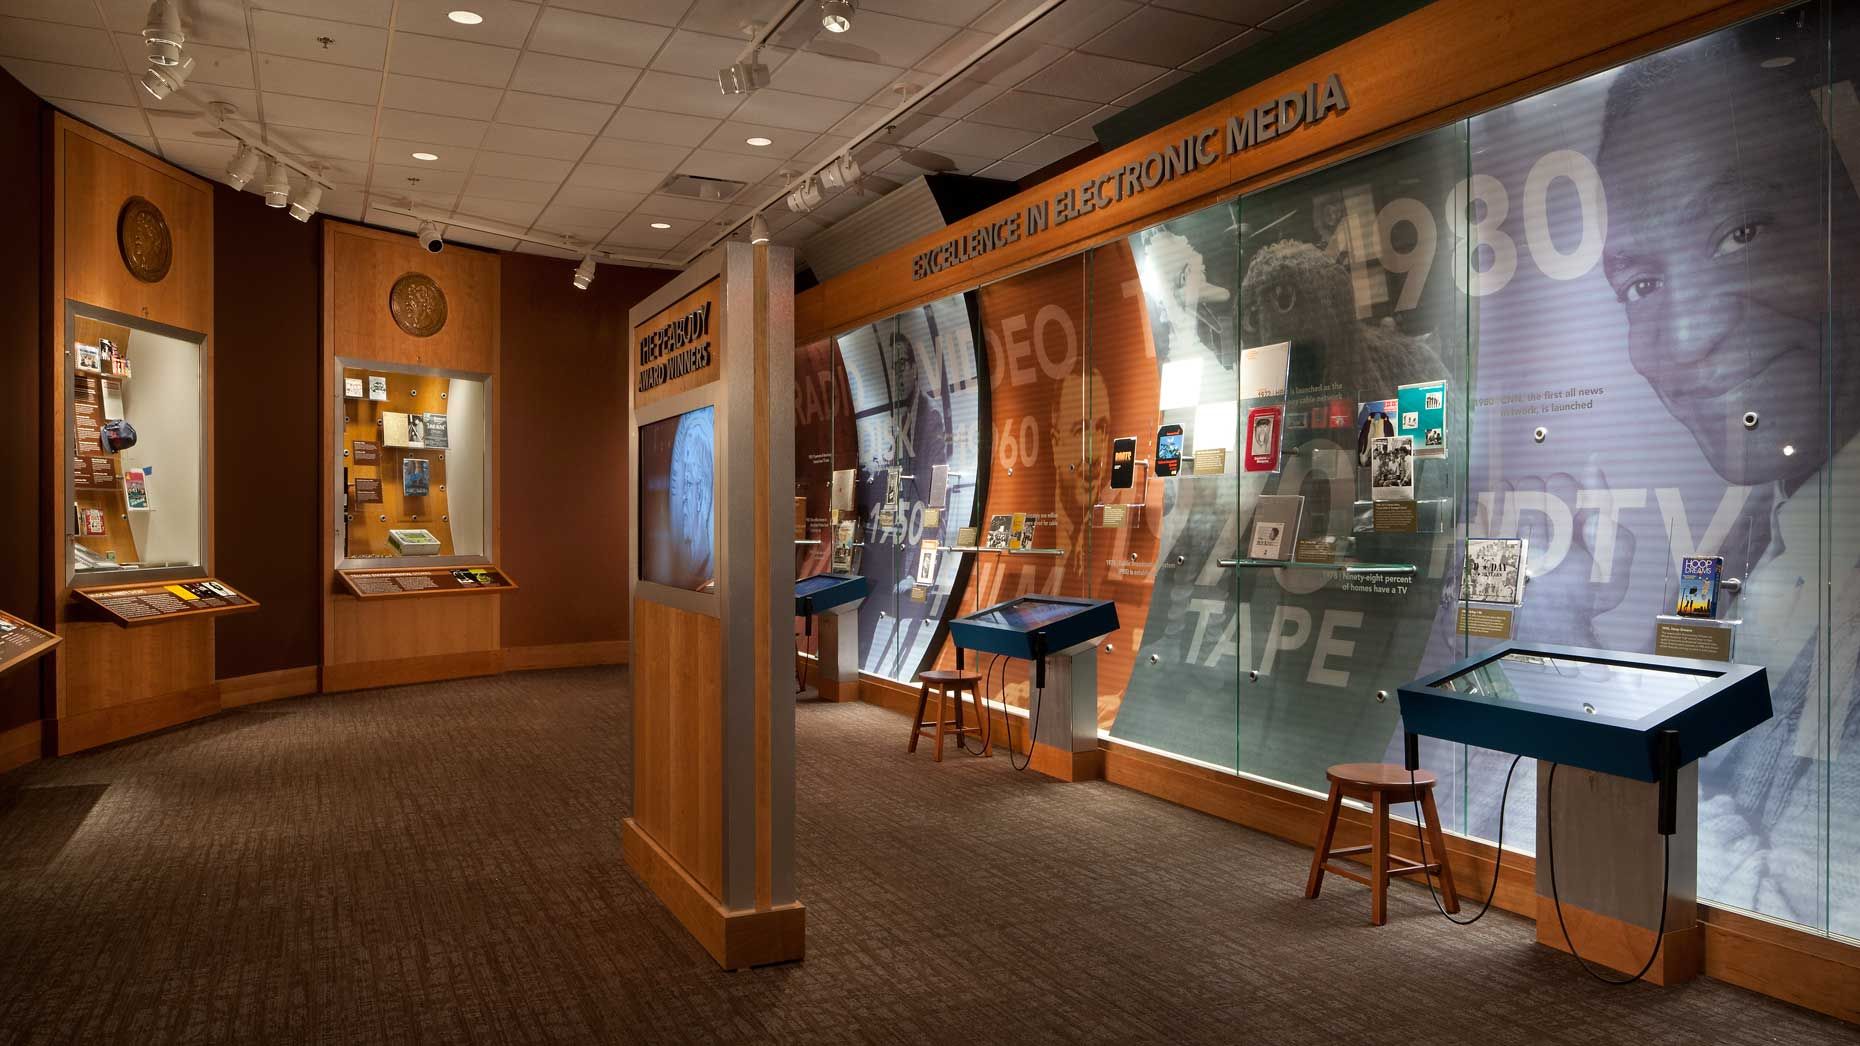 A view of the interactive displays of the UGA Special Collections Library in Athens, GA